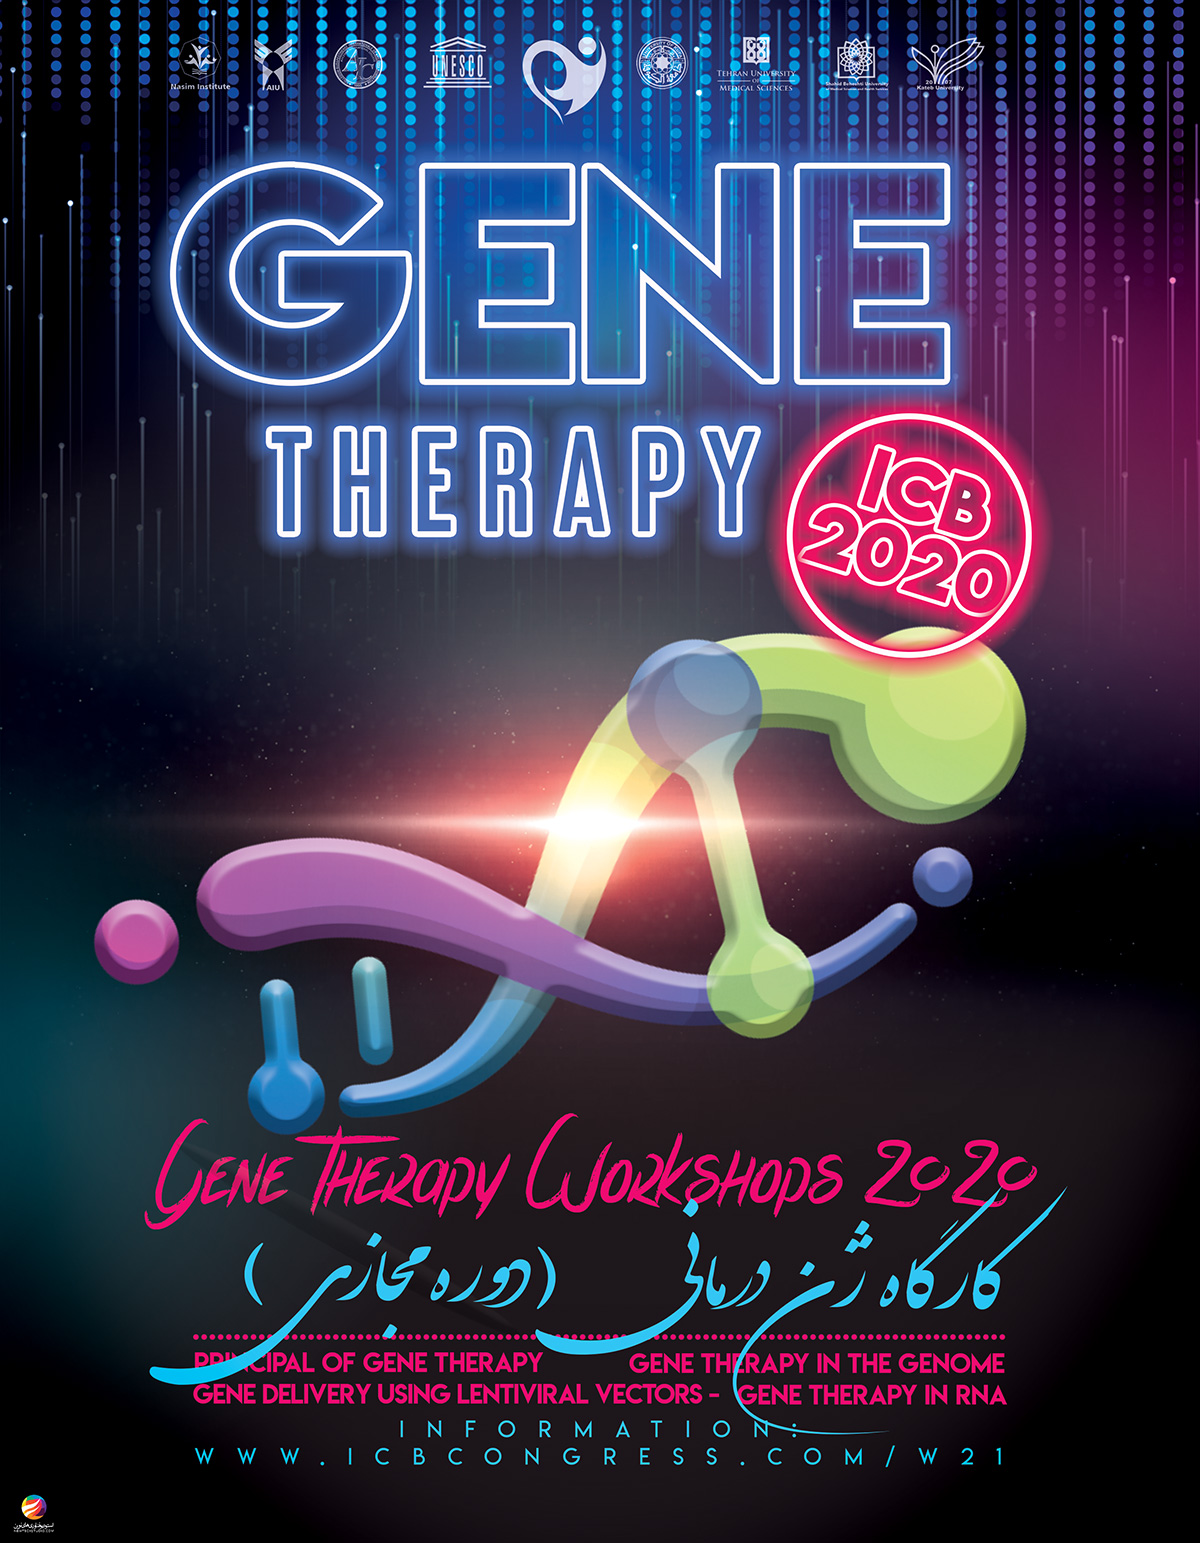 Gene Therapy Workshops